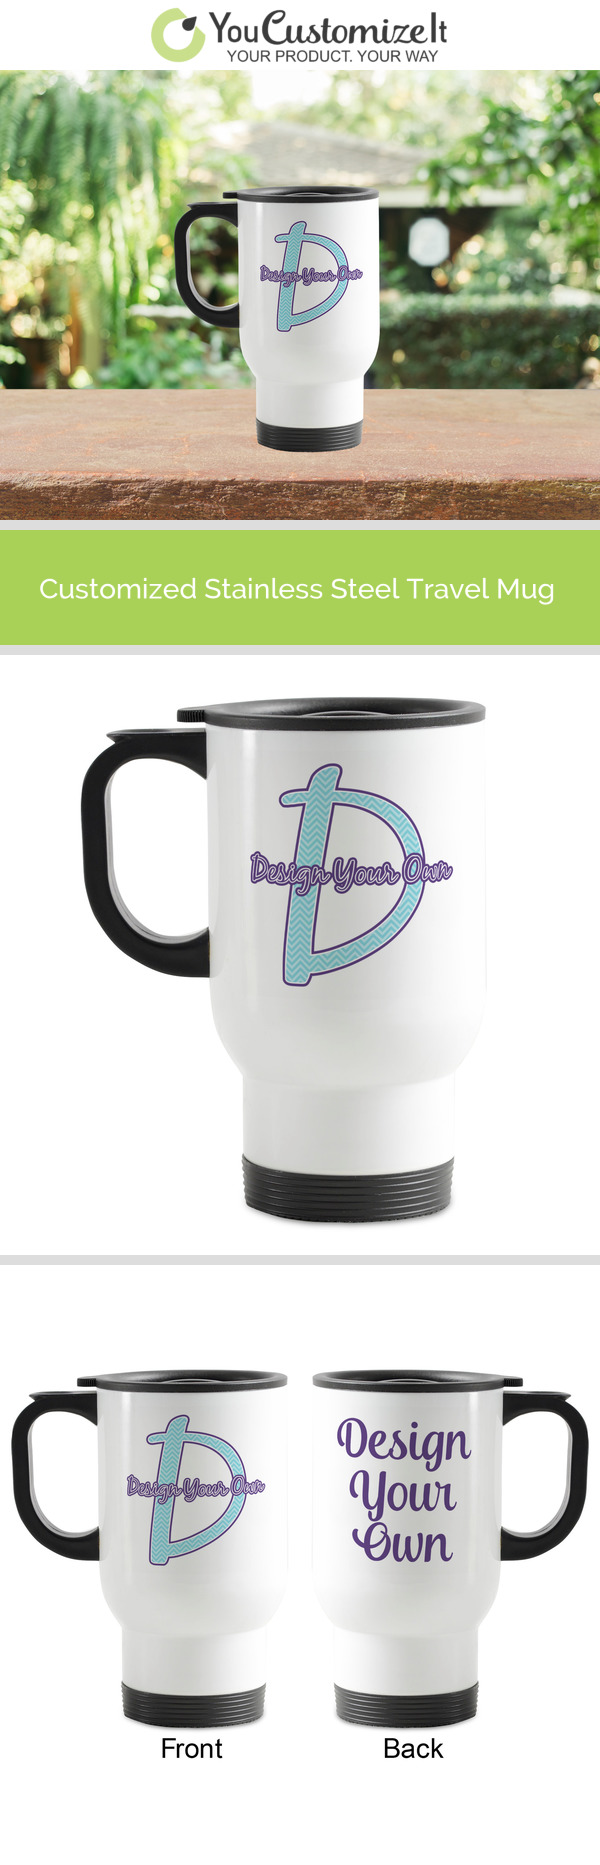 Stainless steel thermo mug - white | mugs with logo printed as promotional  items